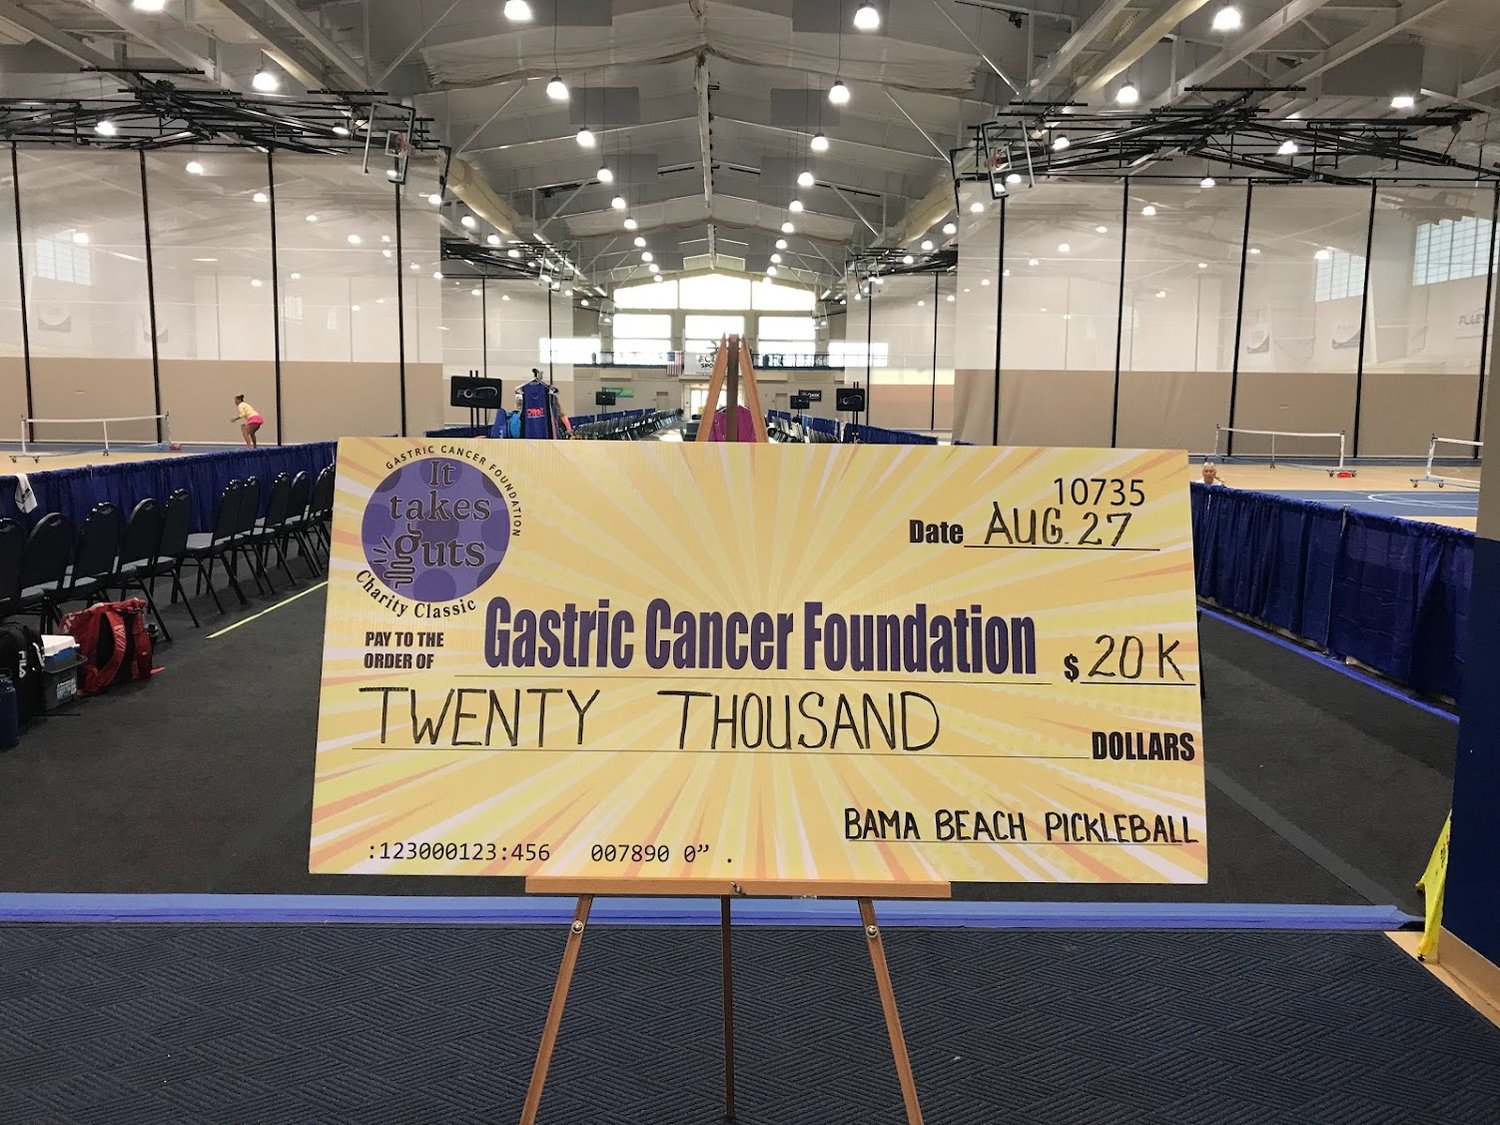 The Gastric Cancer Foundation’s Charity Classic, held Aug. 24-28 at the Foley Event Center, raised $20,000 in donations. The Foundation was presented with a mock check at the end of the tournament.